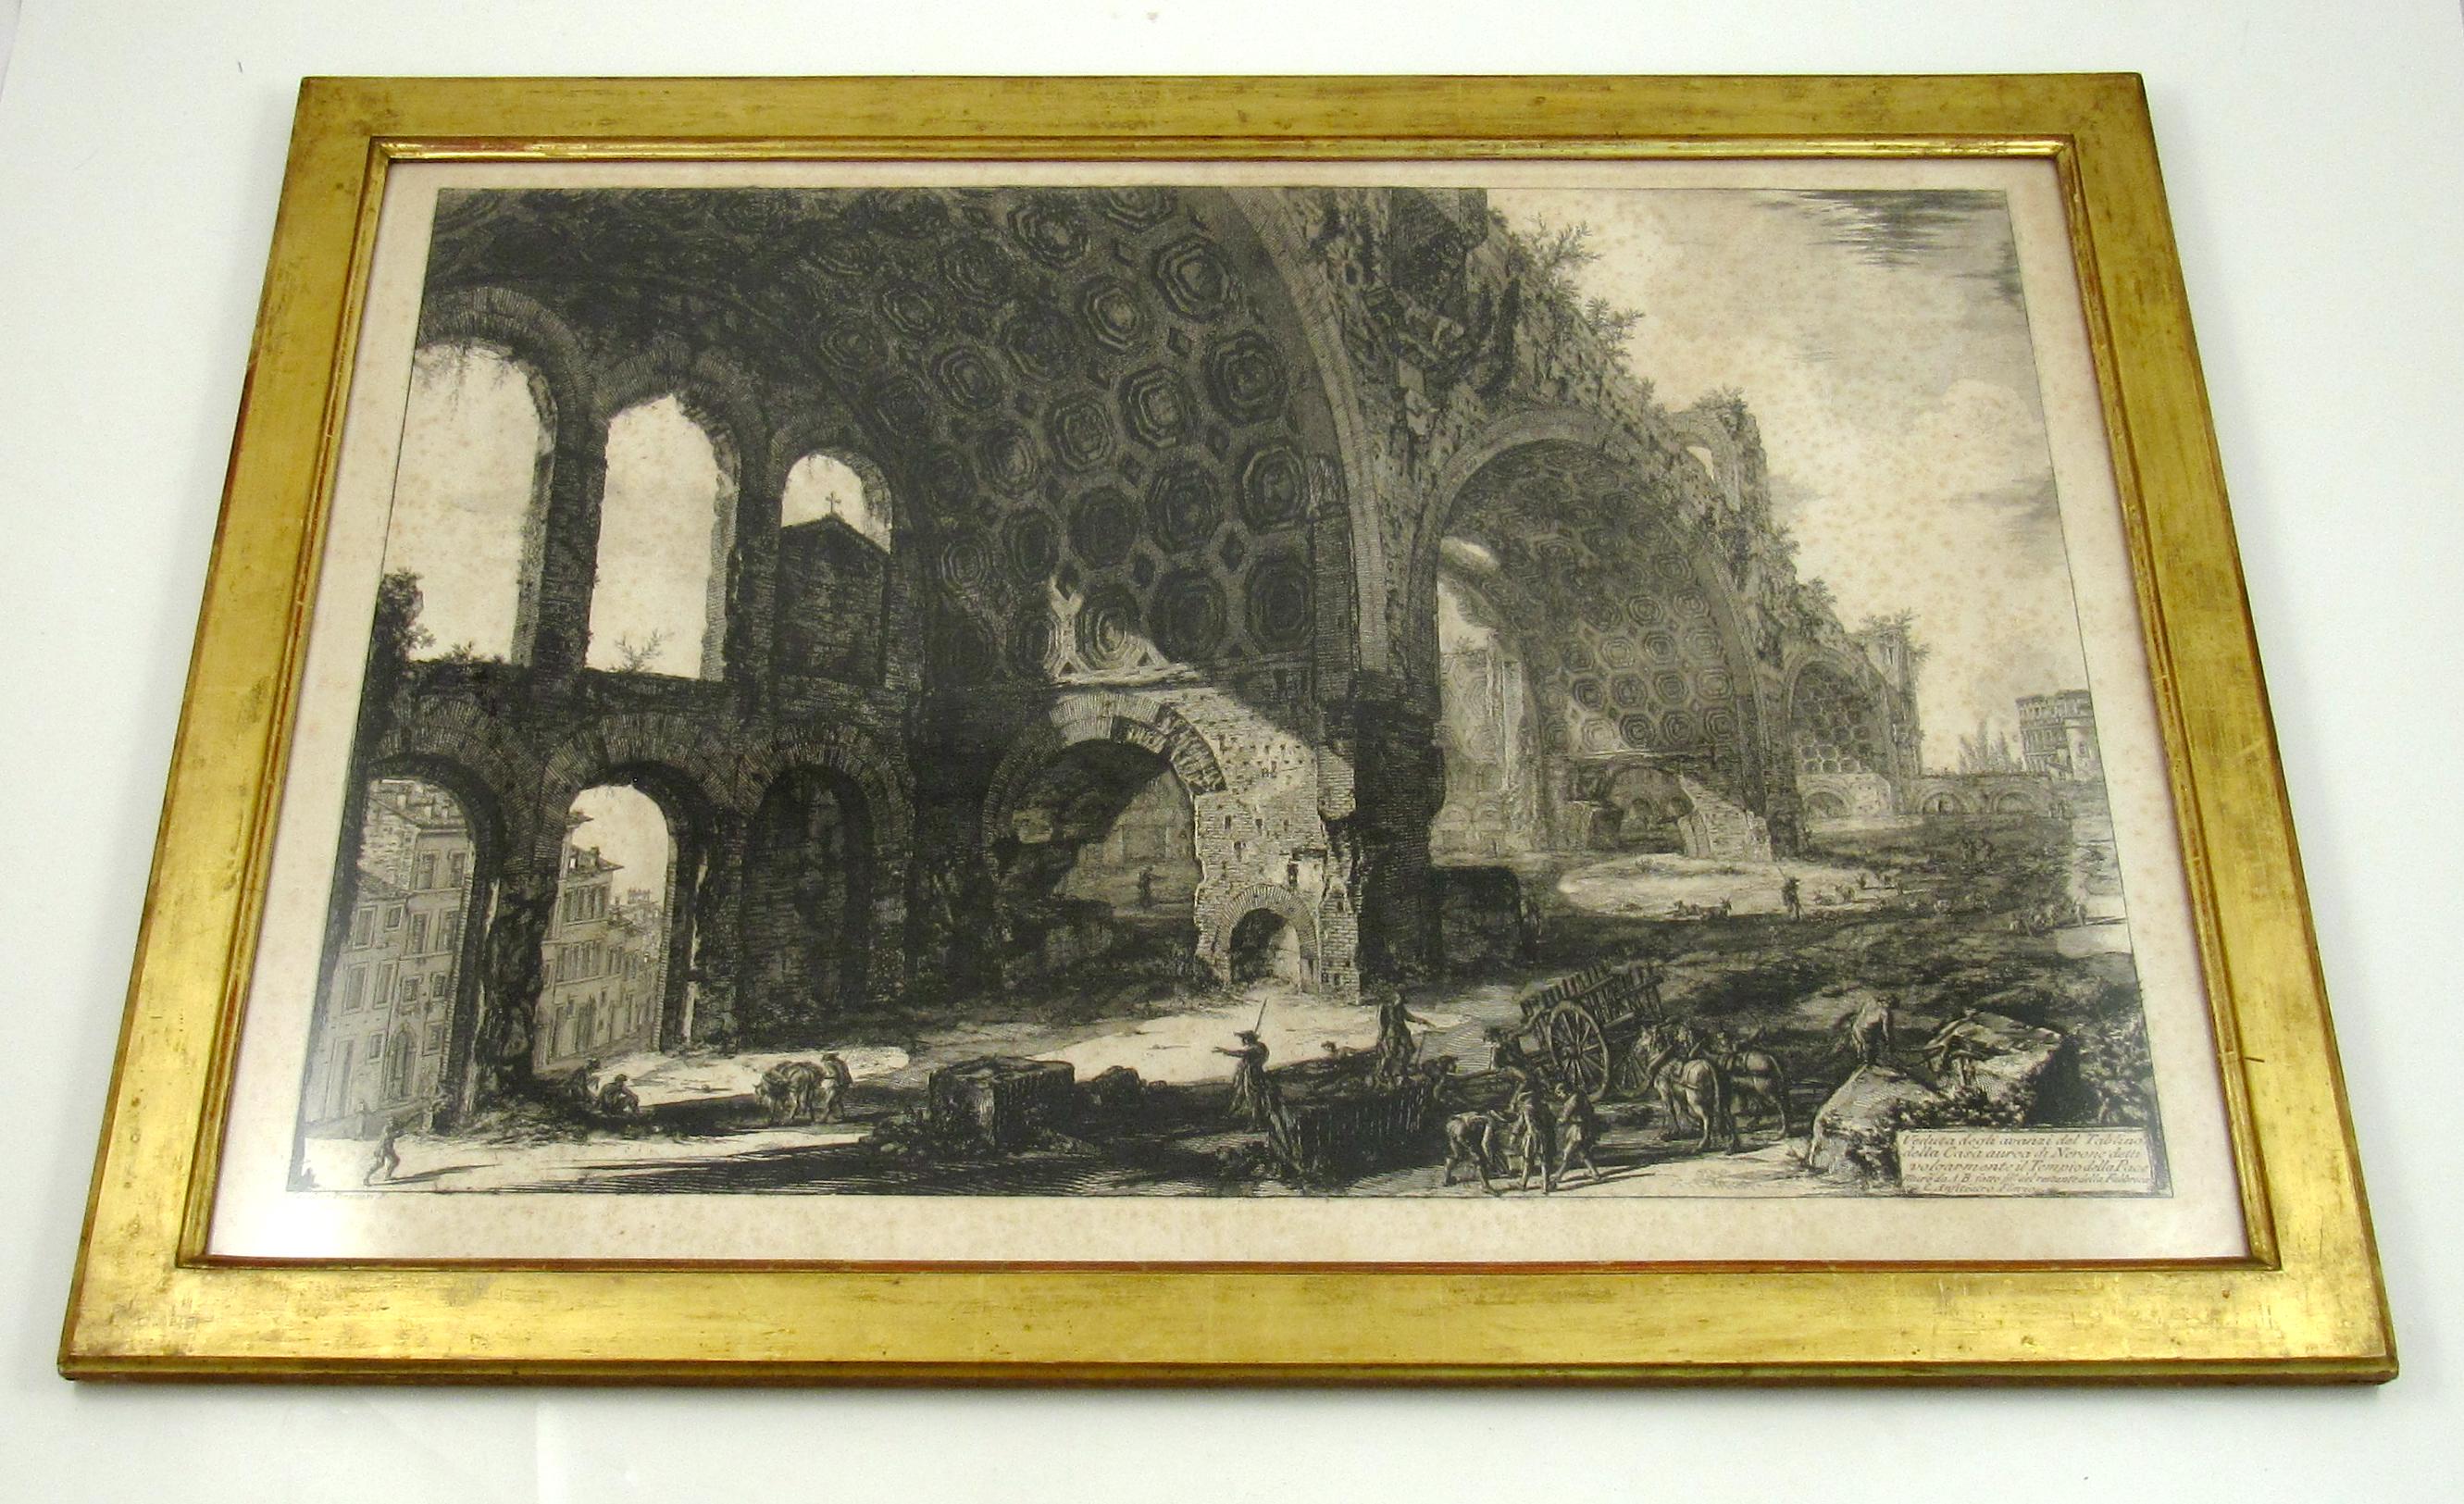 View of the Ruins of the Neronian dining room in Rome - 18th Century Etching - Print by Giovanni Battista Piranesi